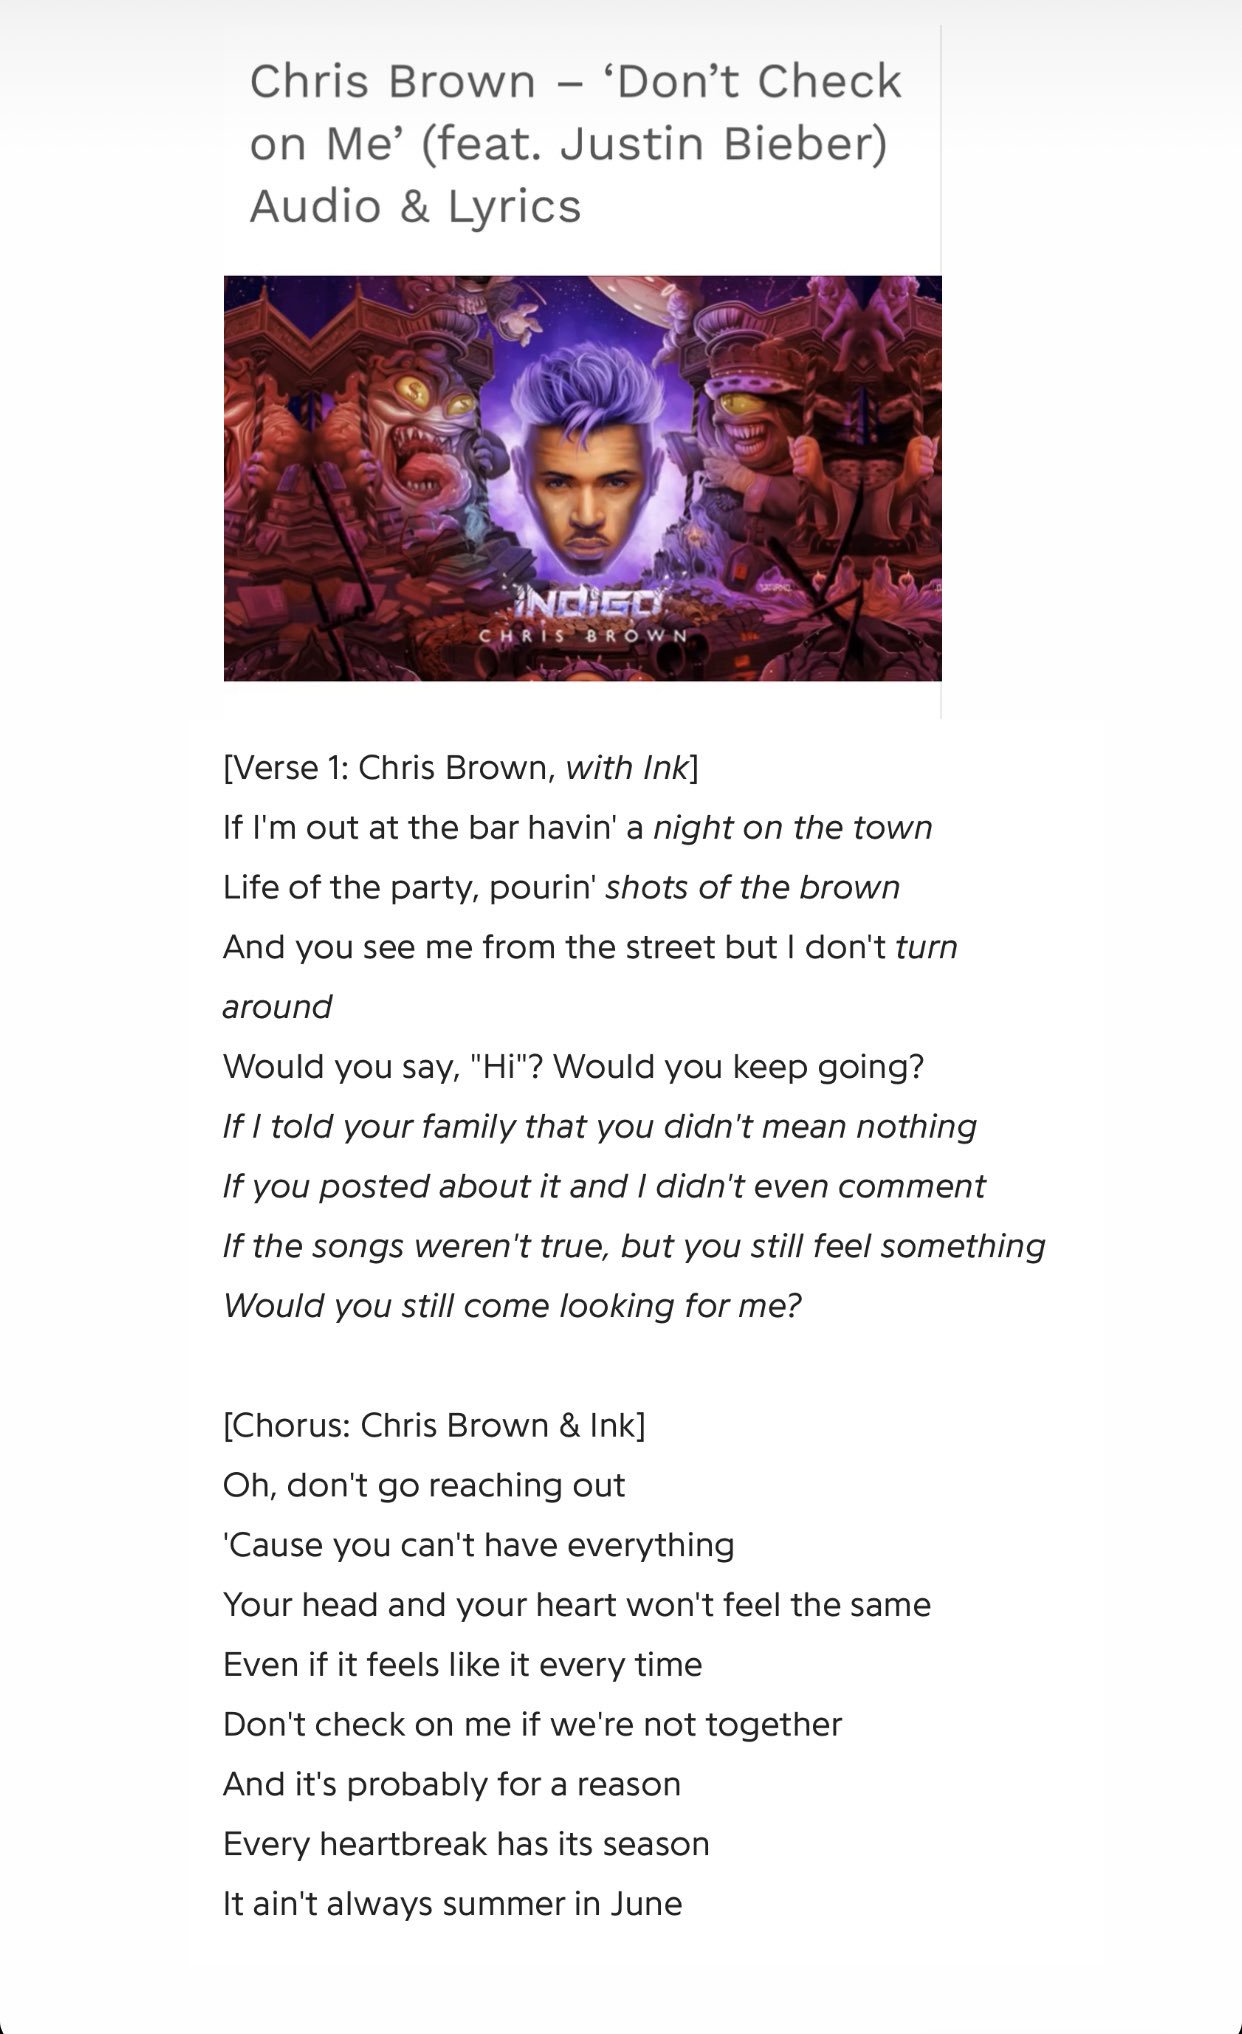 Justin Bieber Crew Check Out The Lyrics To Don T Check On Me By Chris Brown Featuring Justin Bieber And Ink Courtesy Of Genius Lyrics T Co Ggcobcrtj7